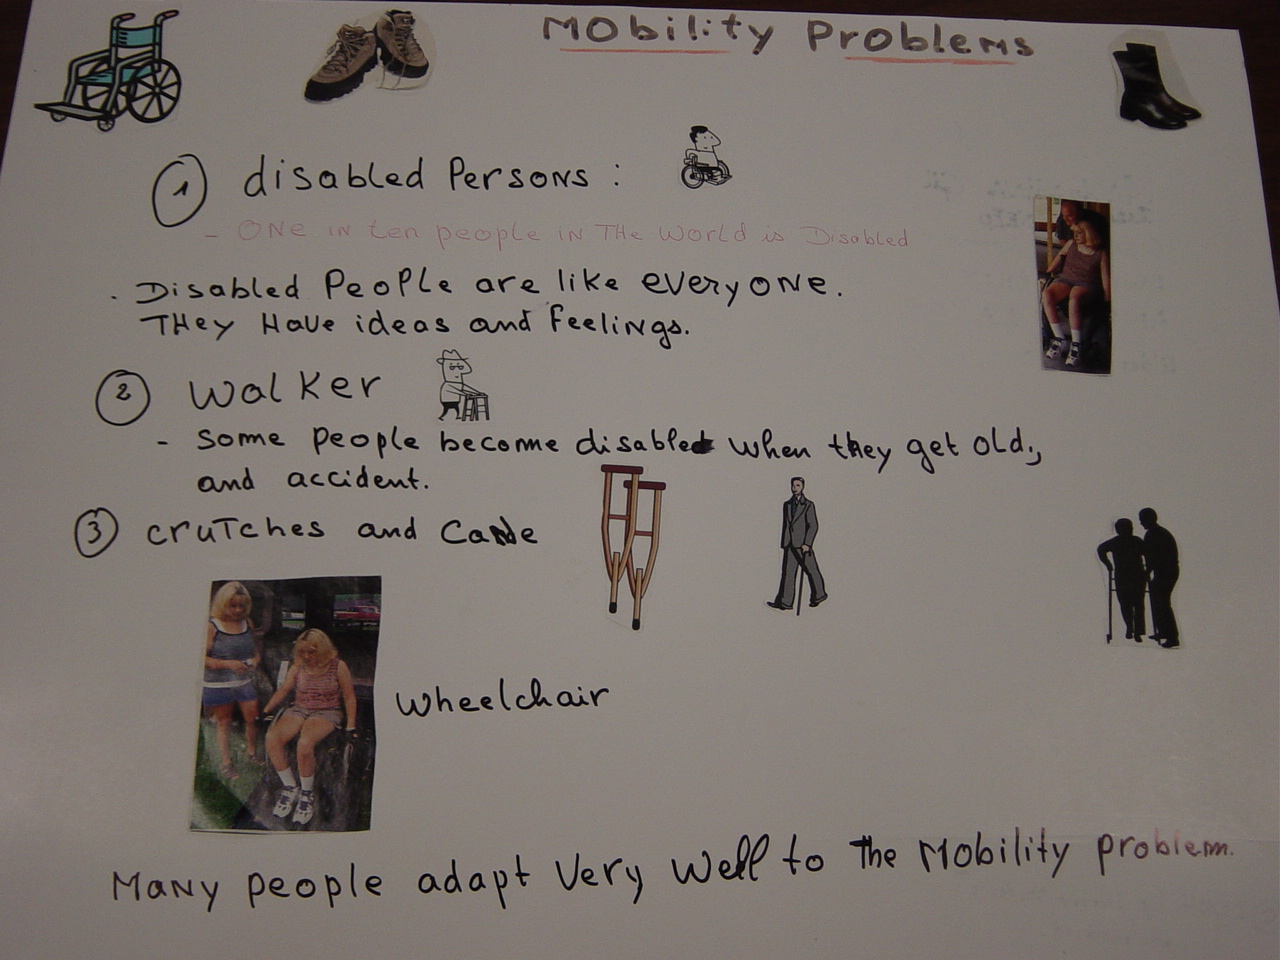 poster illustrating mobility issues